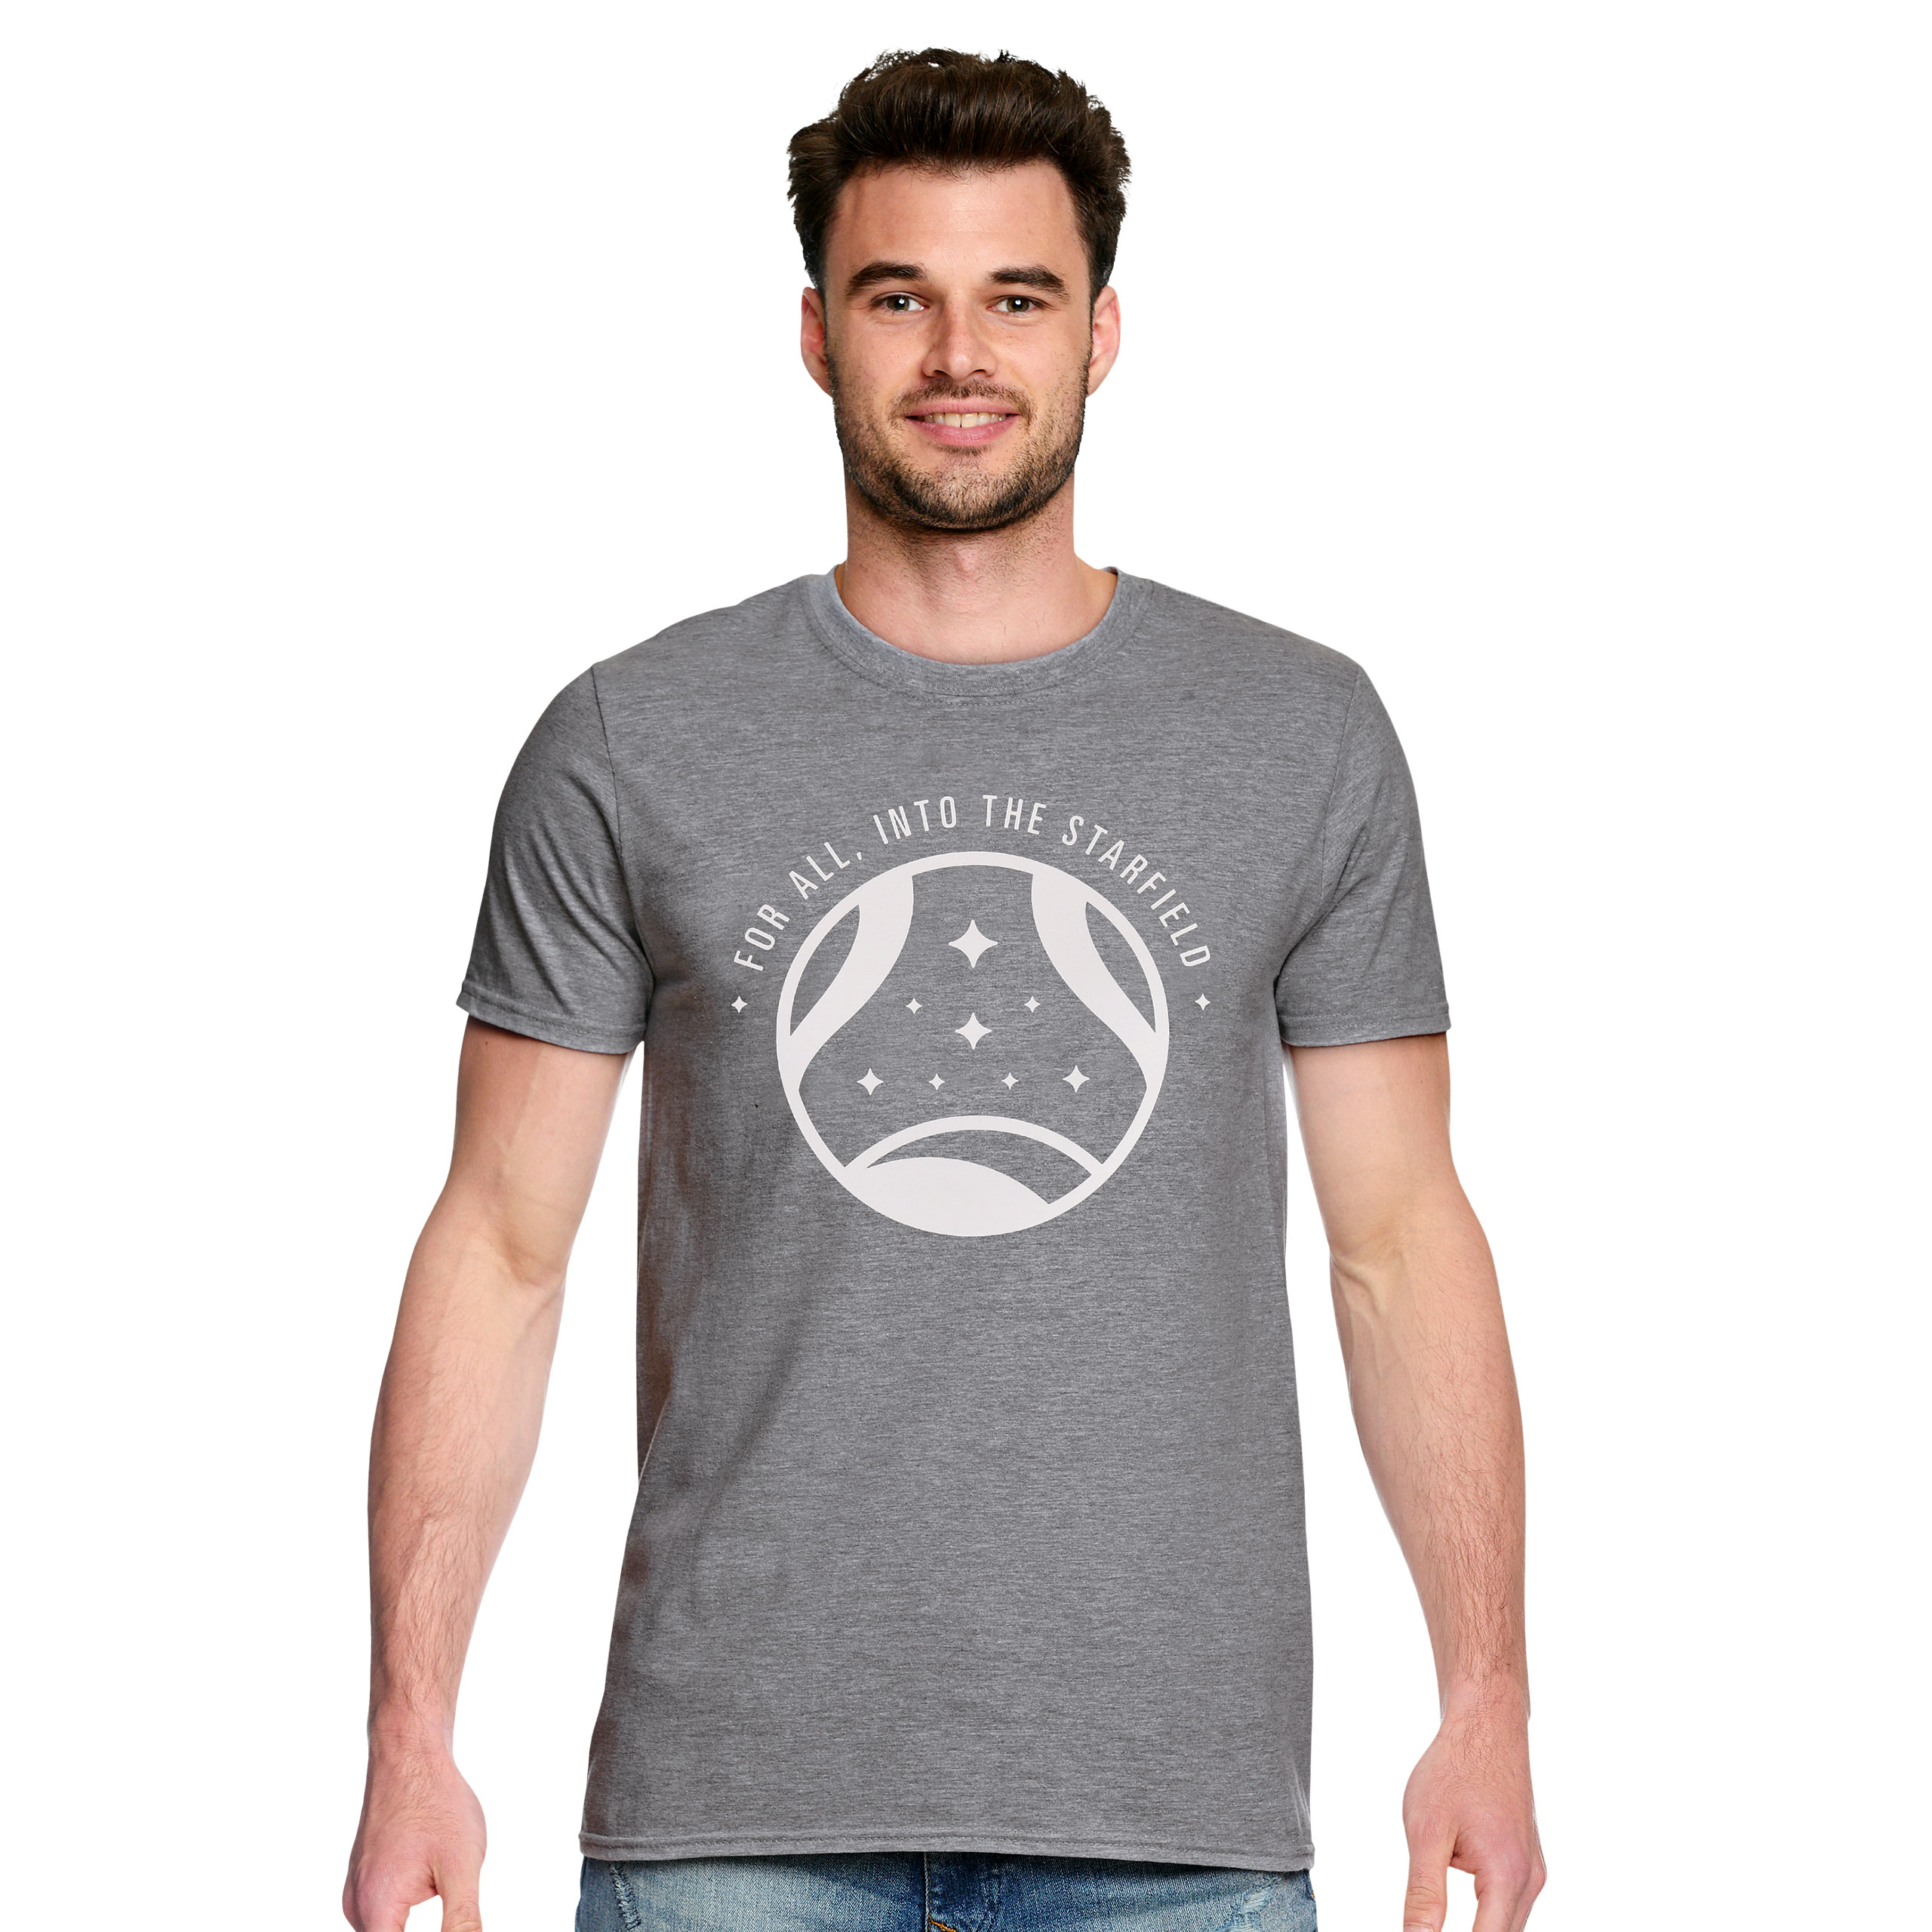 Starfield - T-shirt Into The Starfield gris